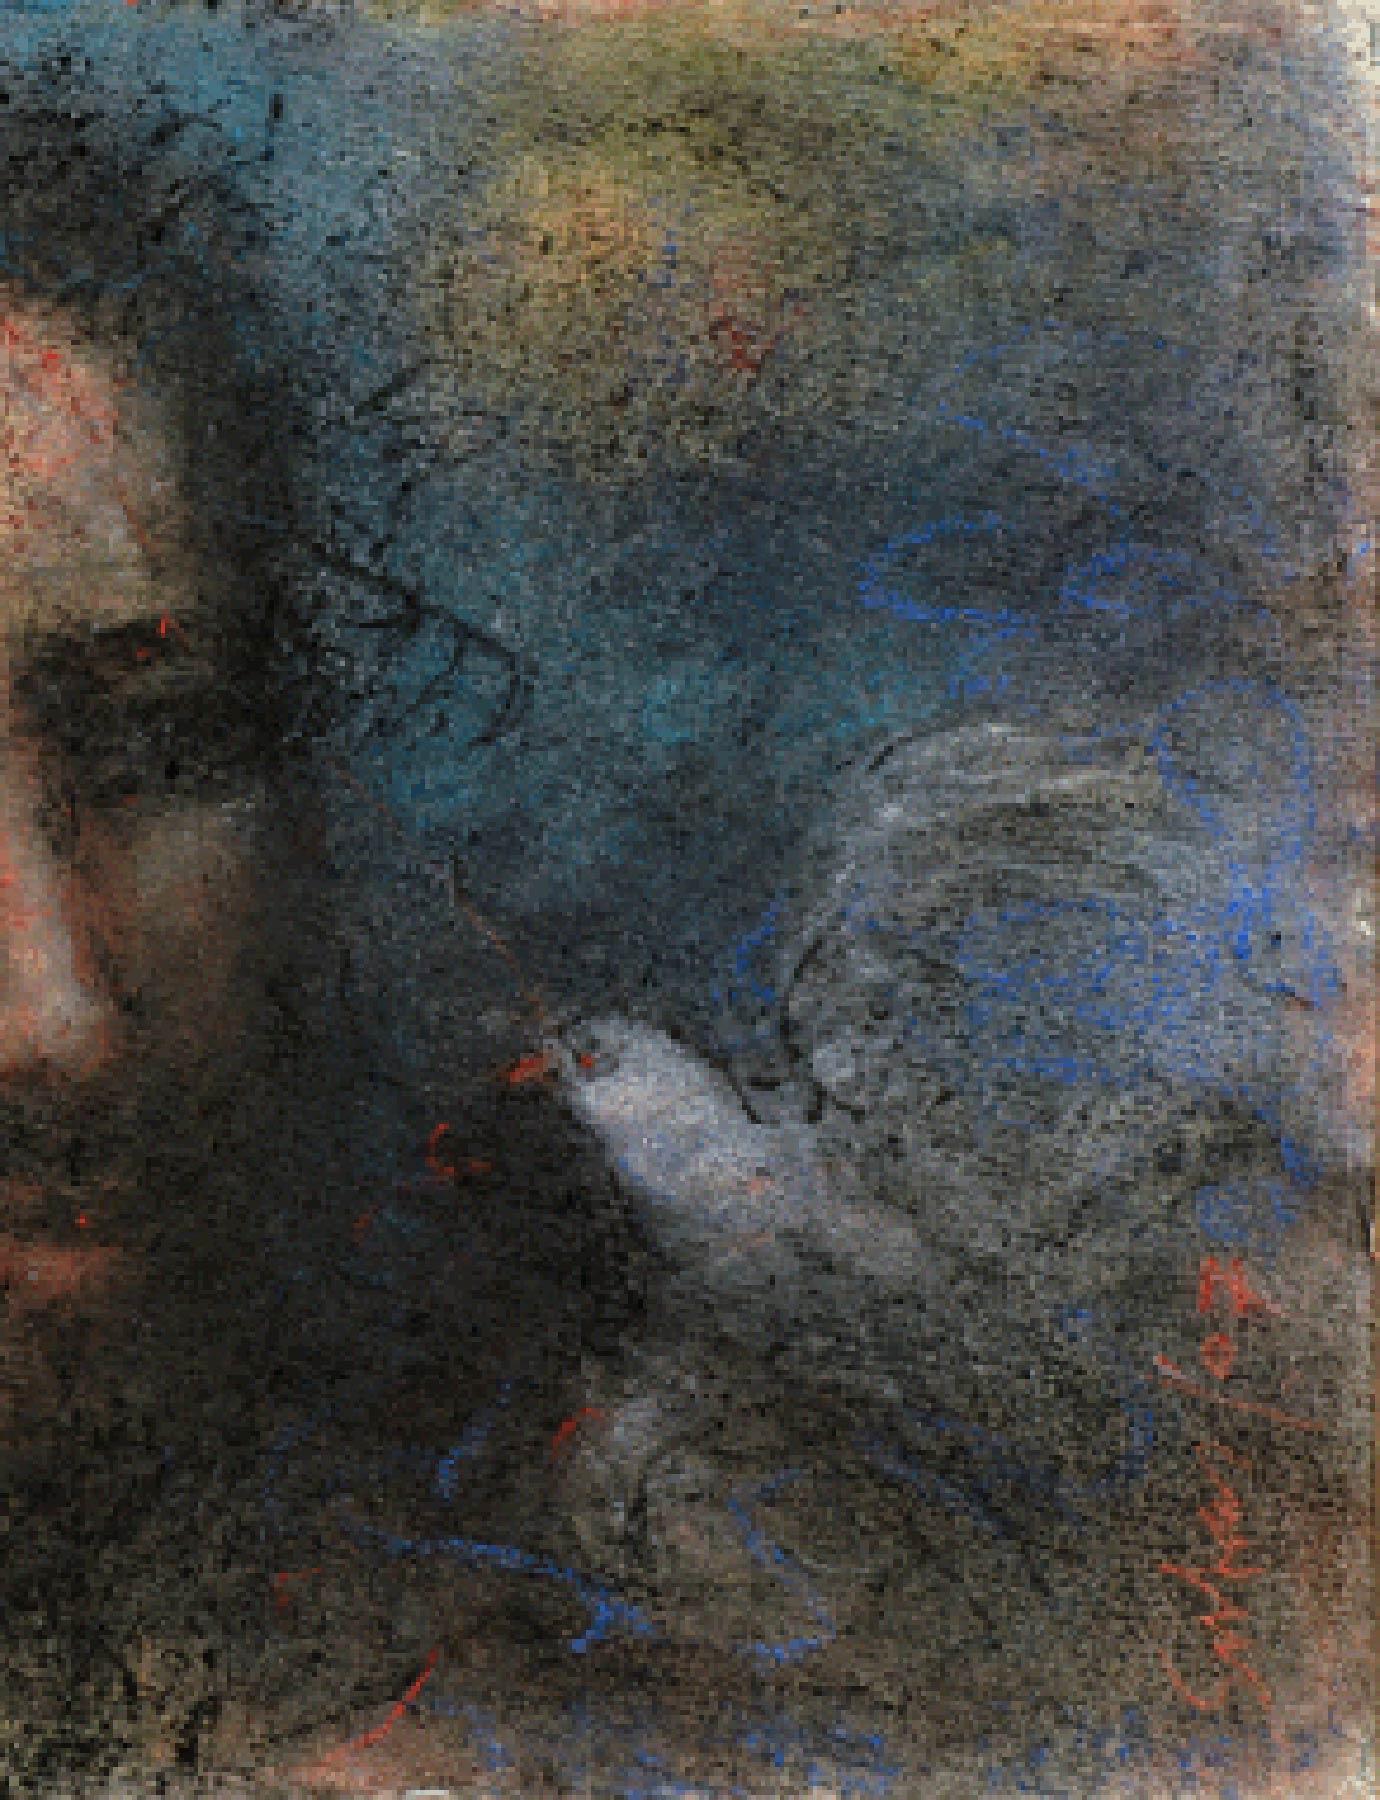 Suhas Roy - Christ - 30 x 20 inches (unframed size)
Pastel on paper
Inclusive of shipment in roll form.

Suhas Roy depicted the face of Jesus portraying pain and agony. Incredulous as they appear, the pair of eyes convey a sense of gloom and despair